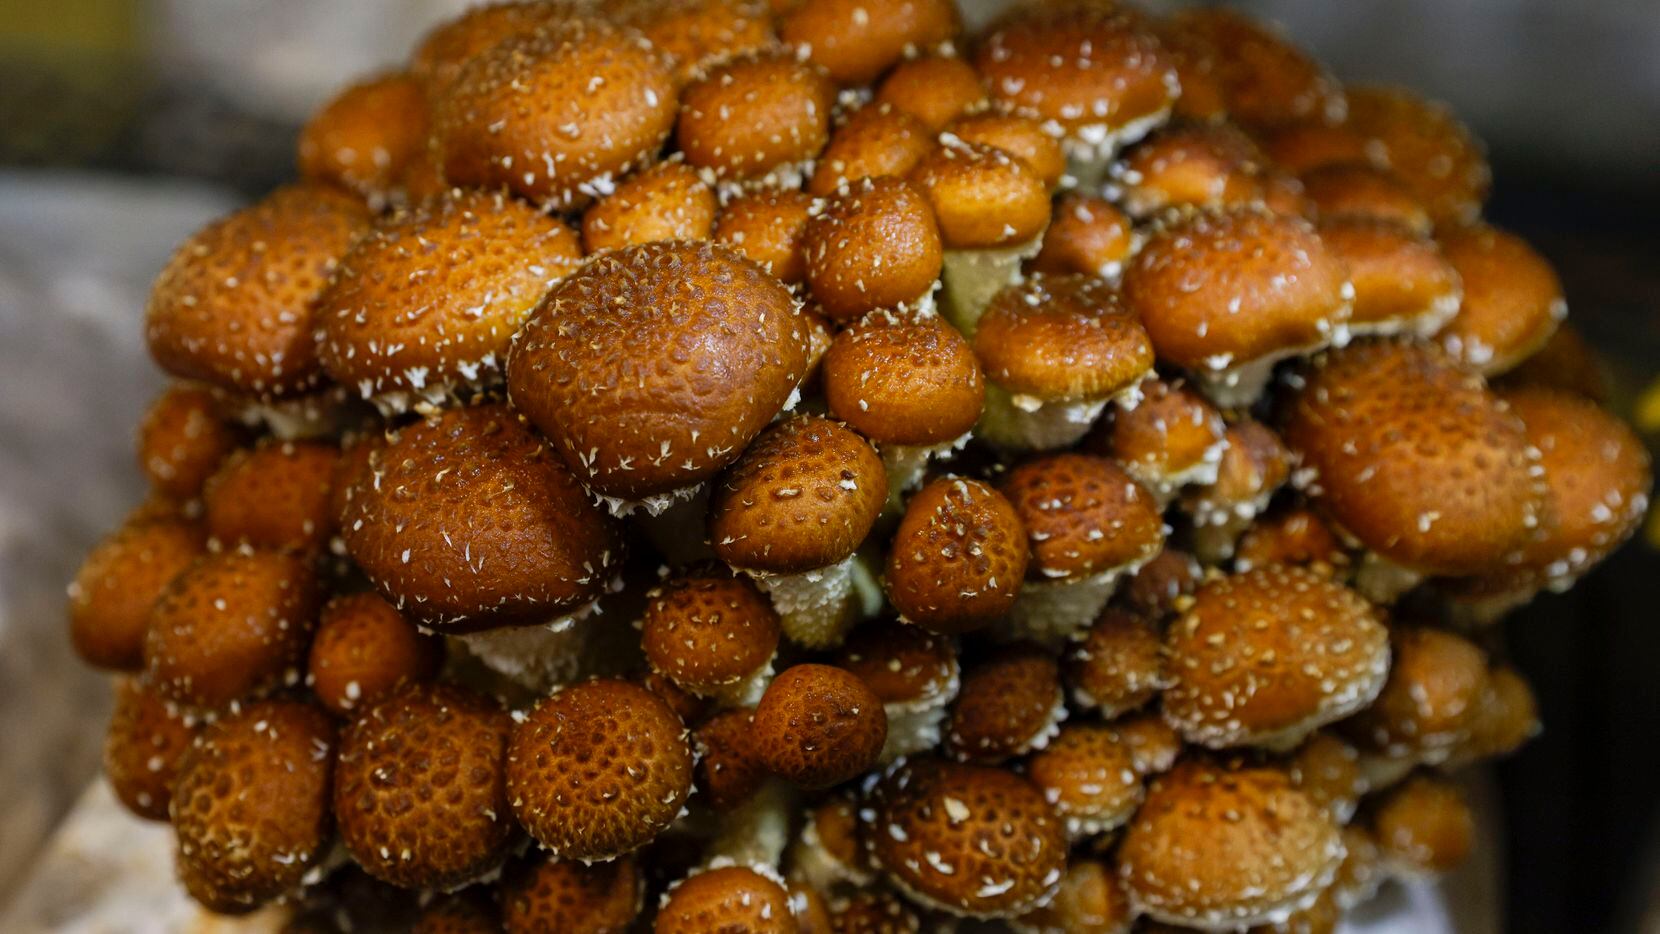 A cluster of Chestnut mushrooms grows at Texas Fungus in Arlington.